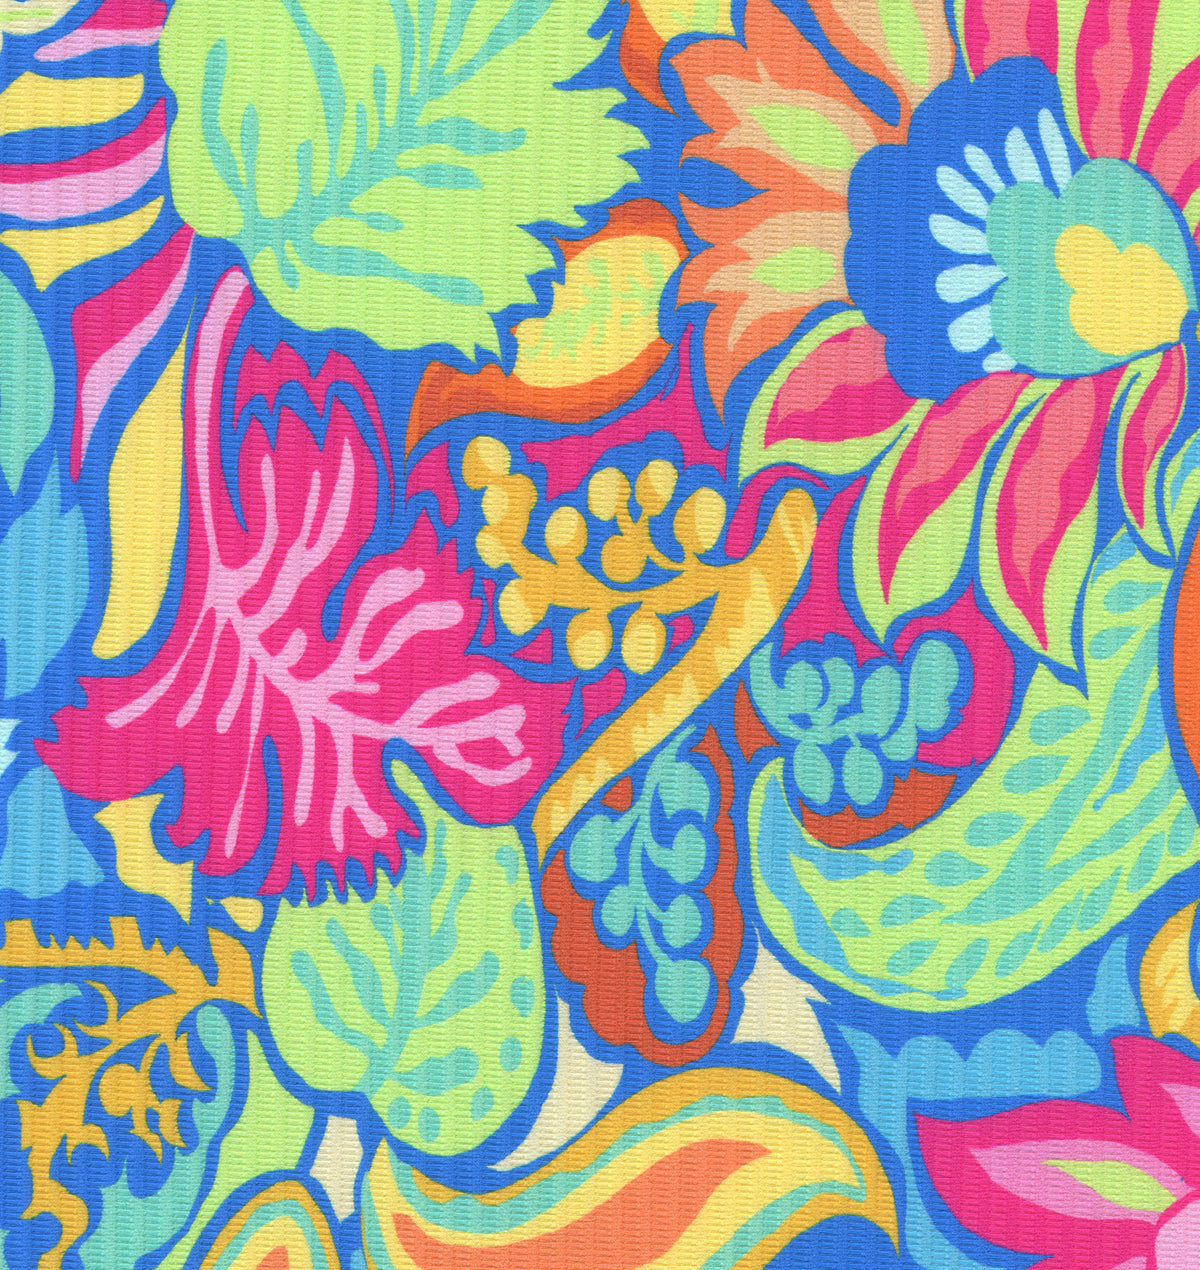 Sunsets Fiji Sandbar Rib tropical swimsuit print a with a colorful floral pattern in Electric Blue, Blue Bliss, and Begonia Sandbar pink